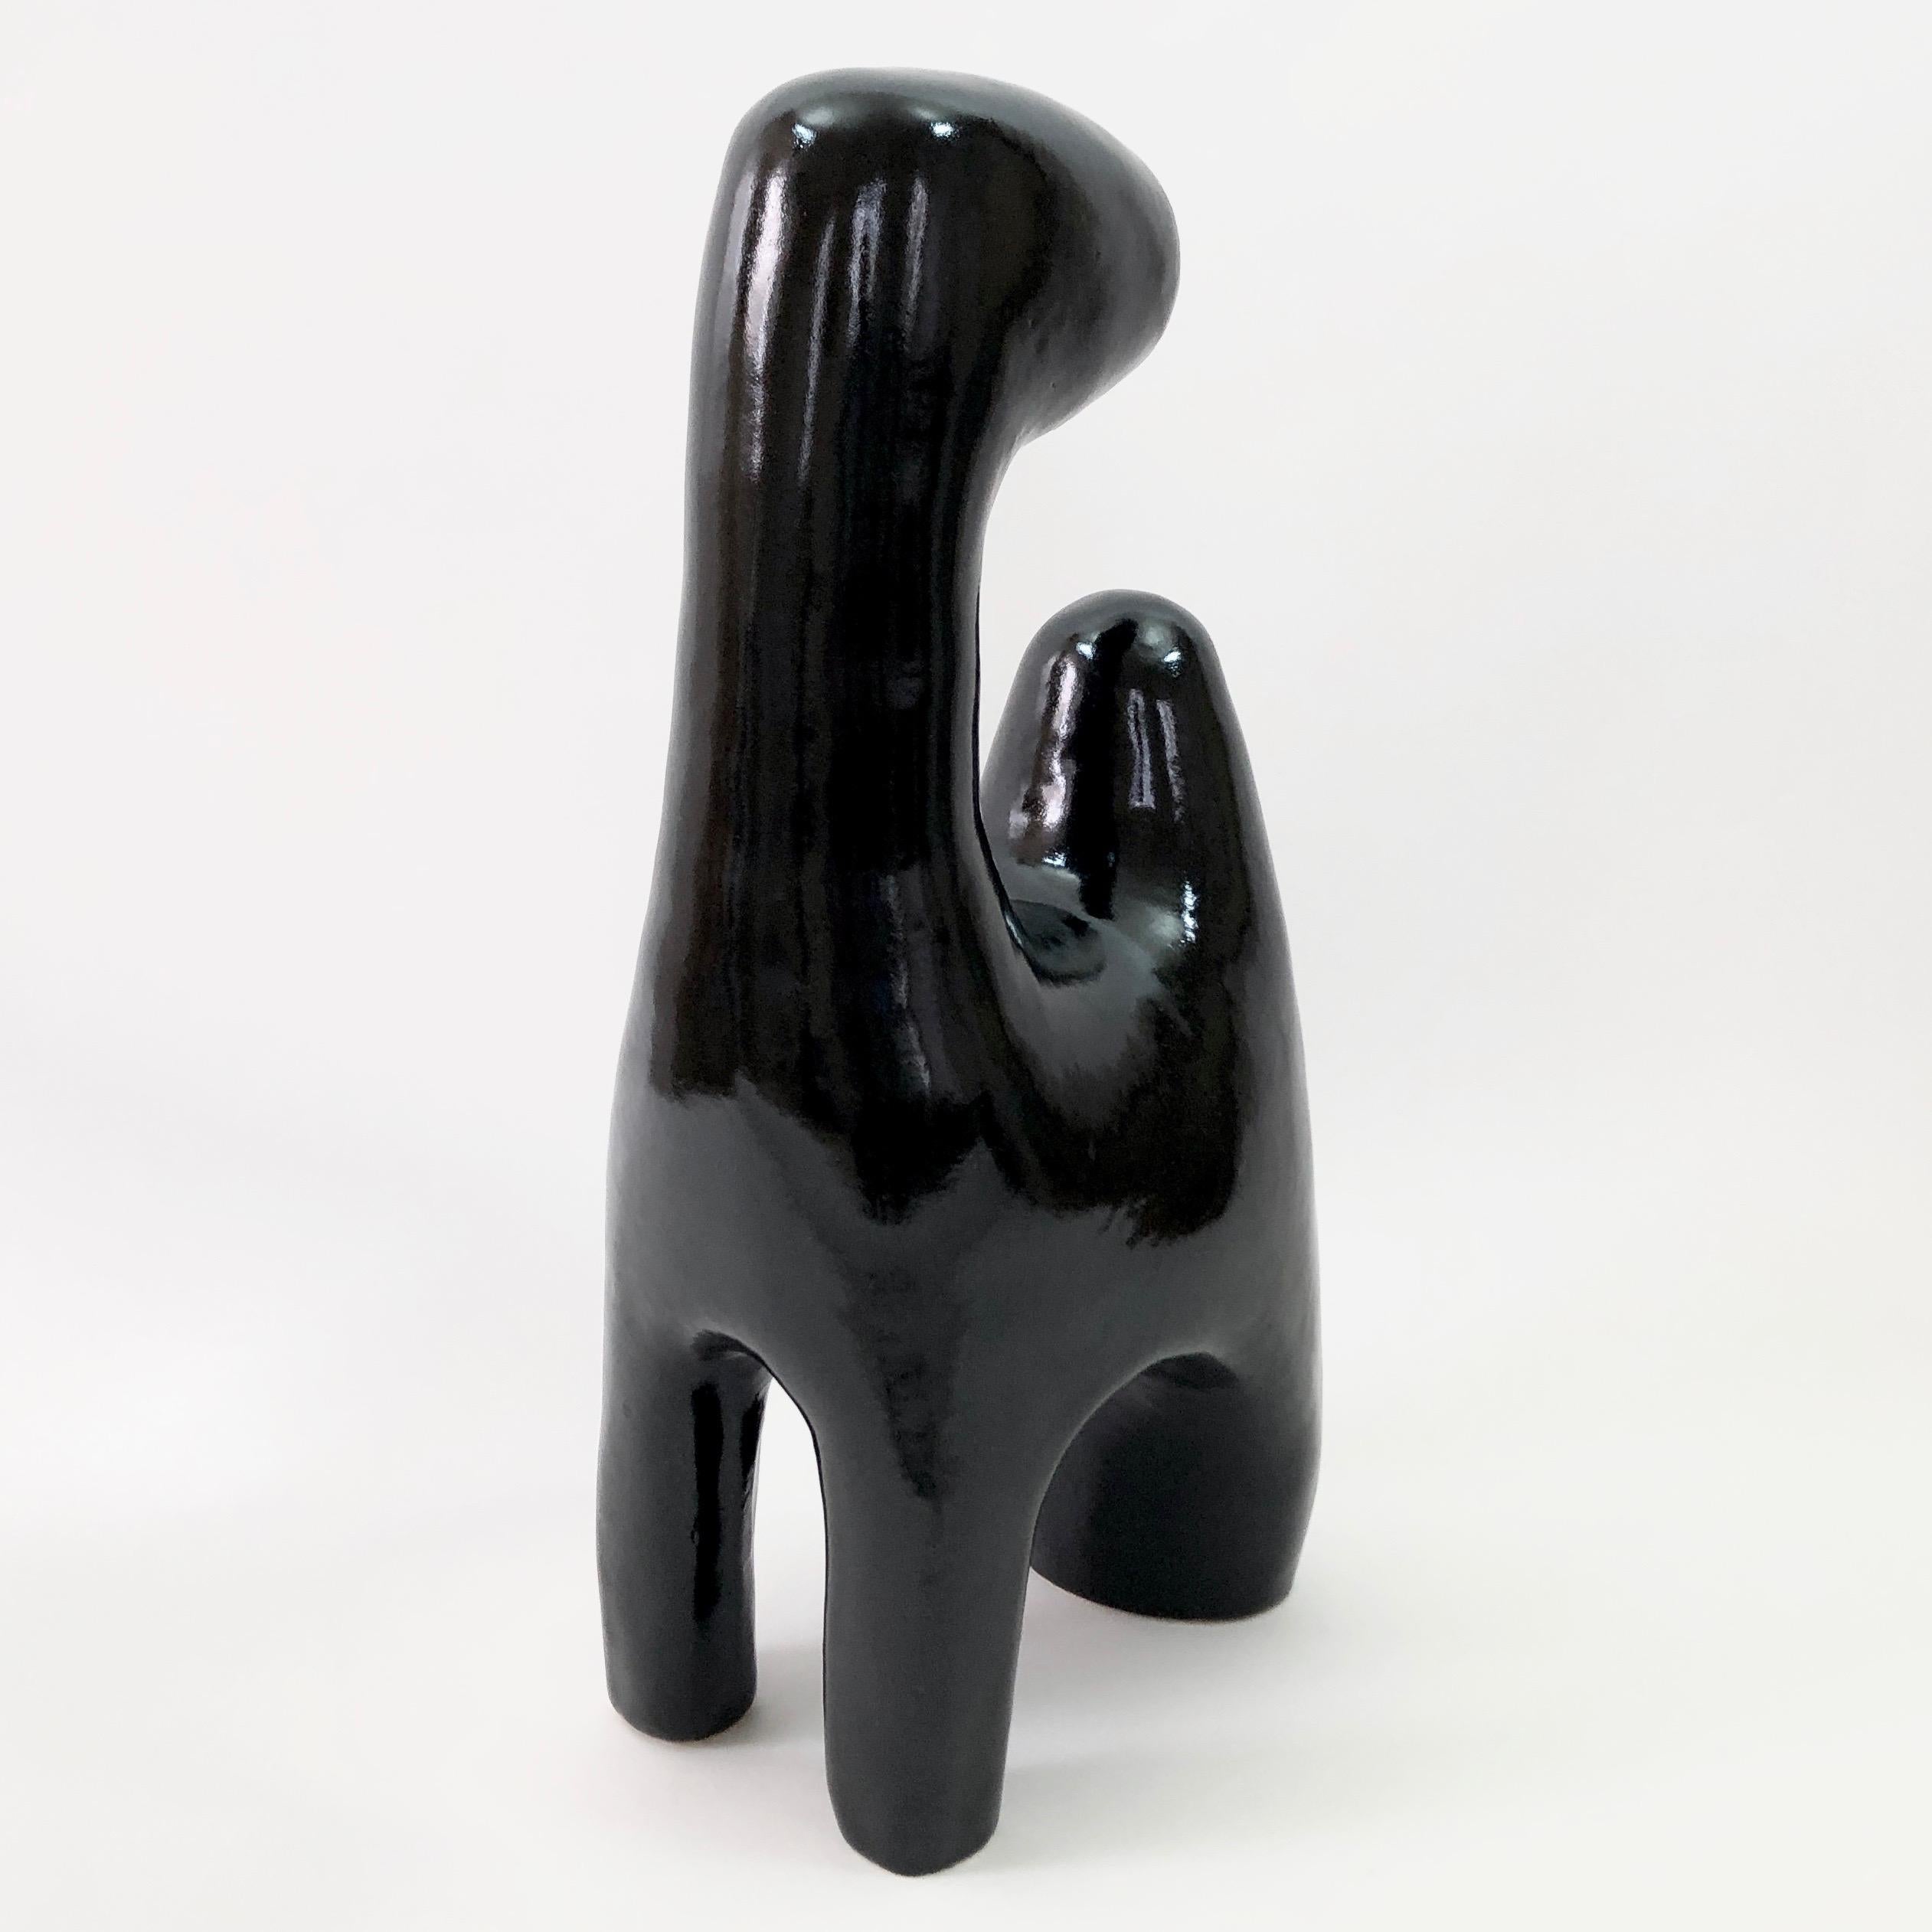 Important biomorphic sculpture, abstract or stylized animal shaped, ceramic enameled in glossy black. 
One of a kind handmade piece, signed and numerated by the French artists and ceramicists: Dalo.
 